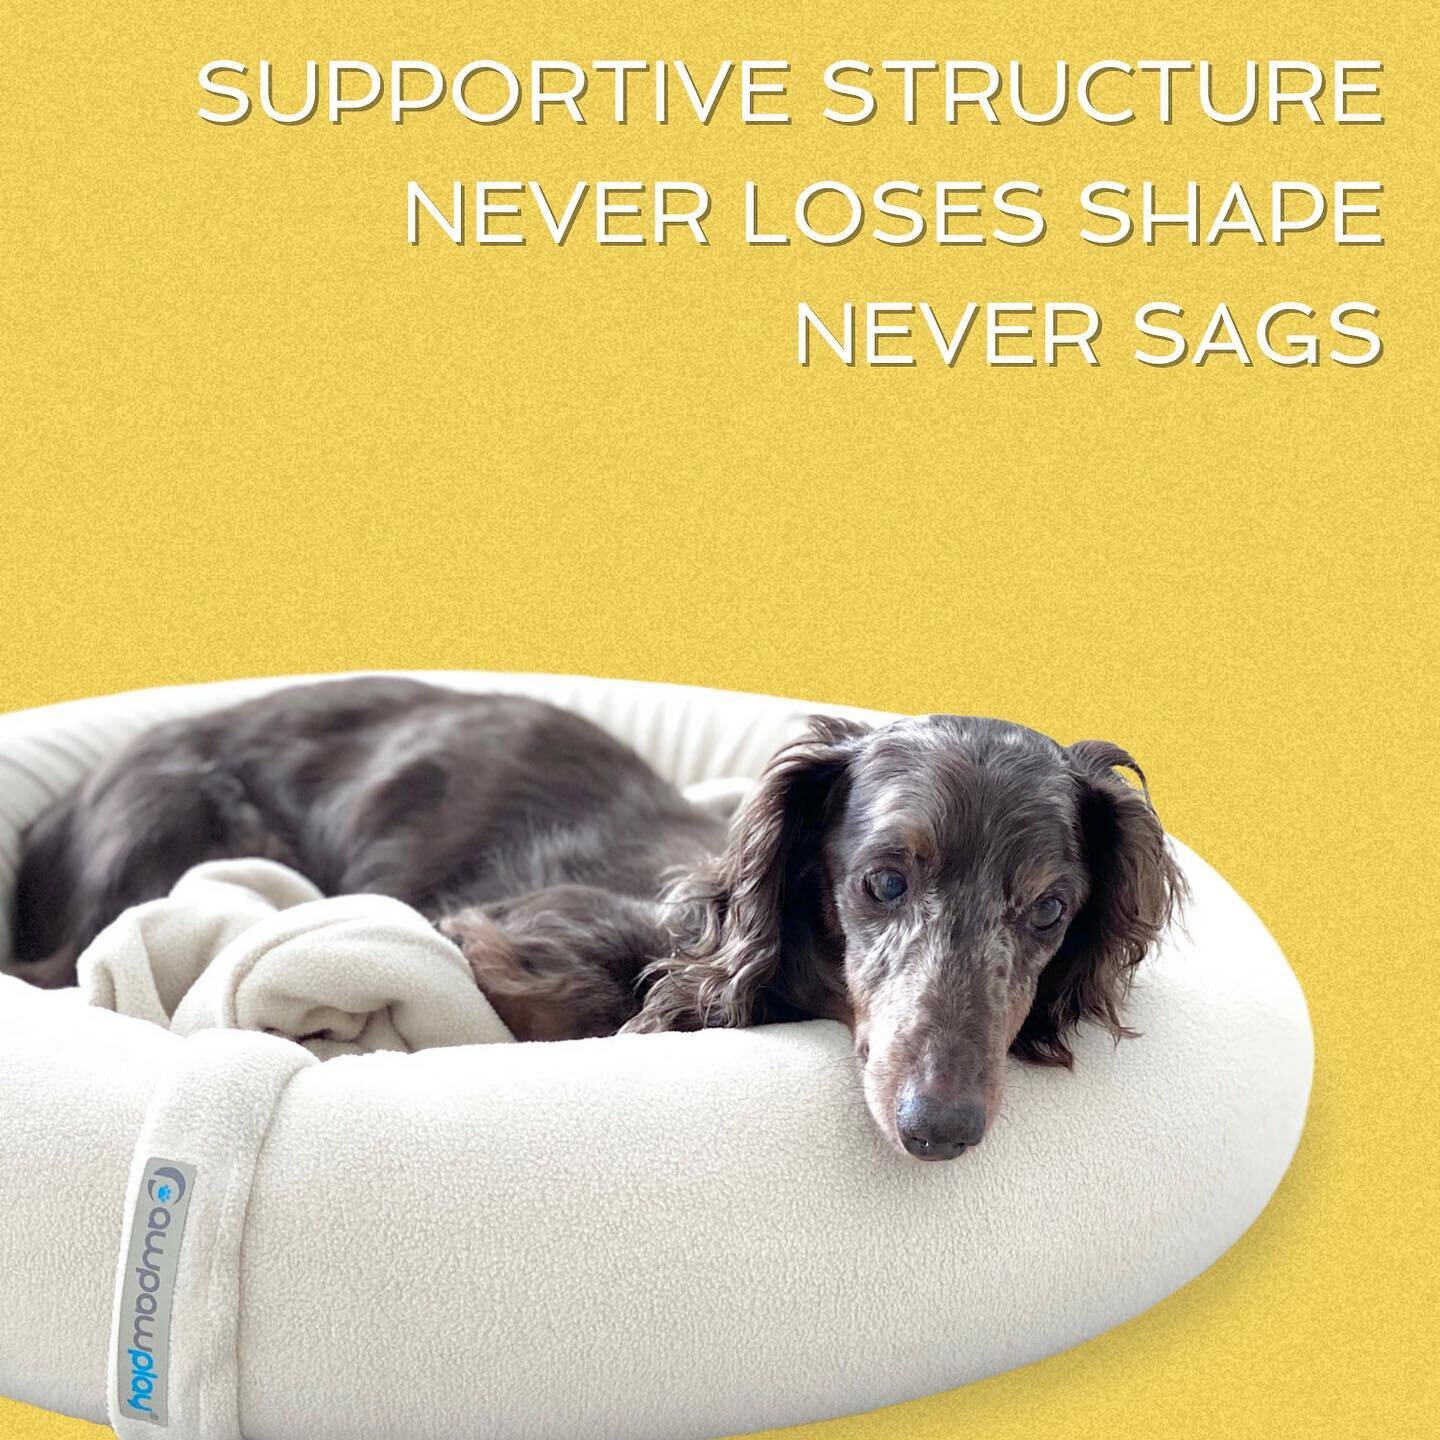 Ruffle Bed - Our bolster is perfect for dogs and cats to rest their heads in comfort🥰
⁣
⁣
⁣
⁣
⁣
⁣
⁣
⁣
⁣
⁣
⁣
⁣
⁣
⁣
⁣
⁣
⁣
⁣
⁣
⁣
#pawpawplay #rufflebed #dachshundlife #dachshunddaily #dachshundgram #catsforever #catsforlife #catstuff #catsclub #sillyca